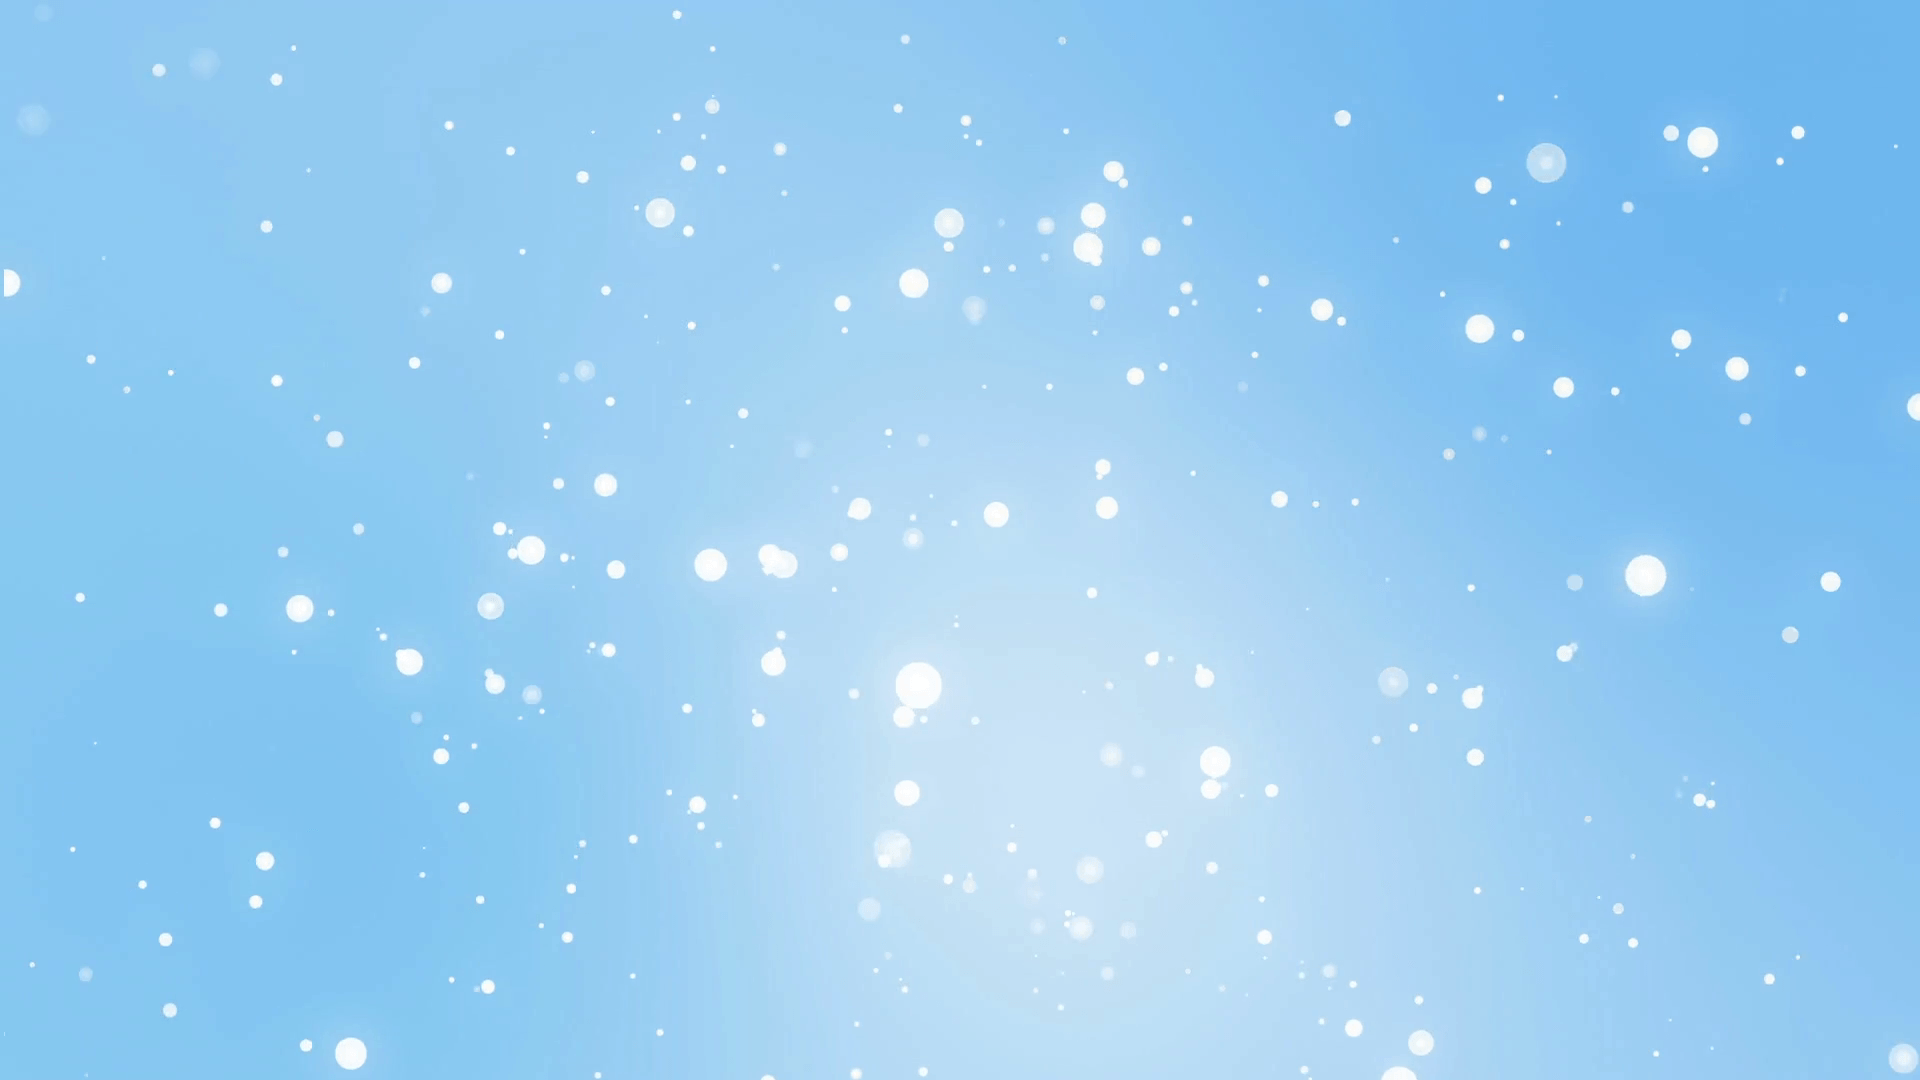 Glowing white snowflake particles falling down against a light teal